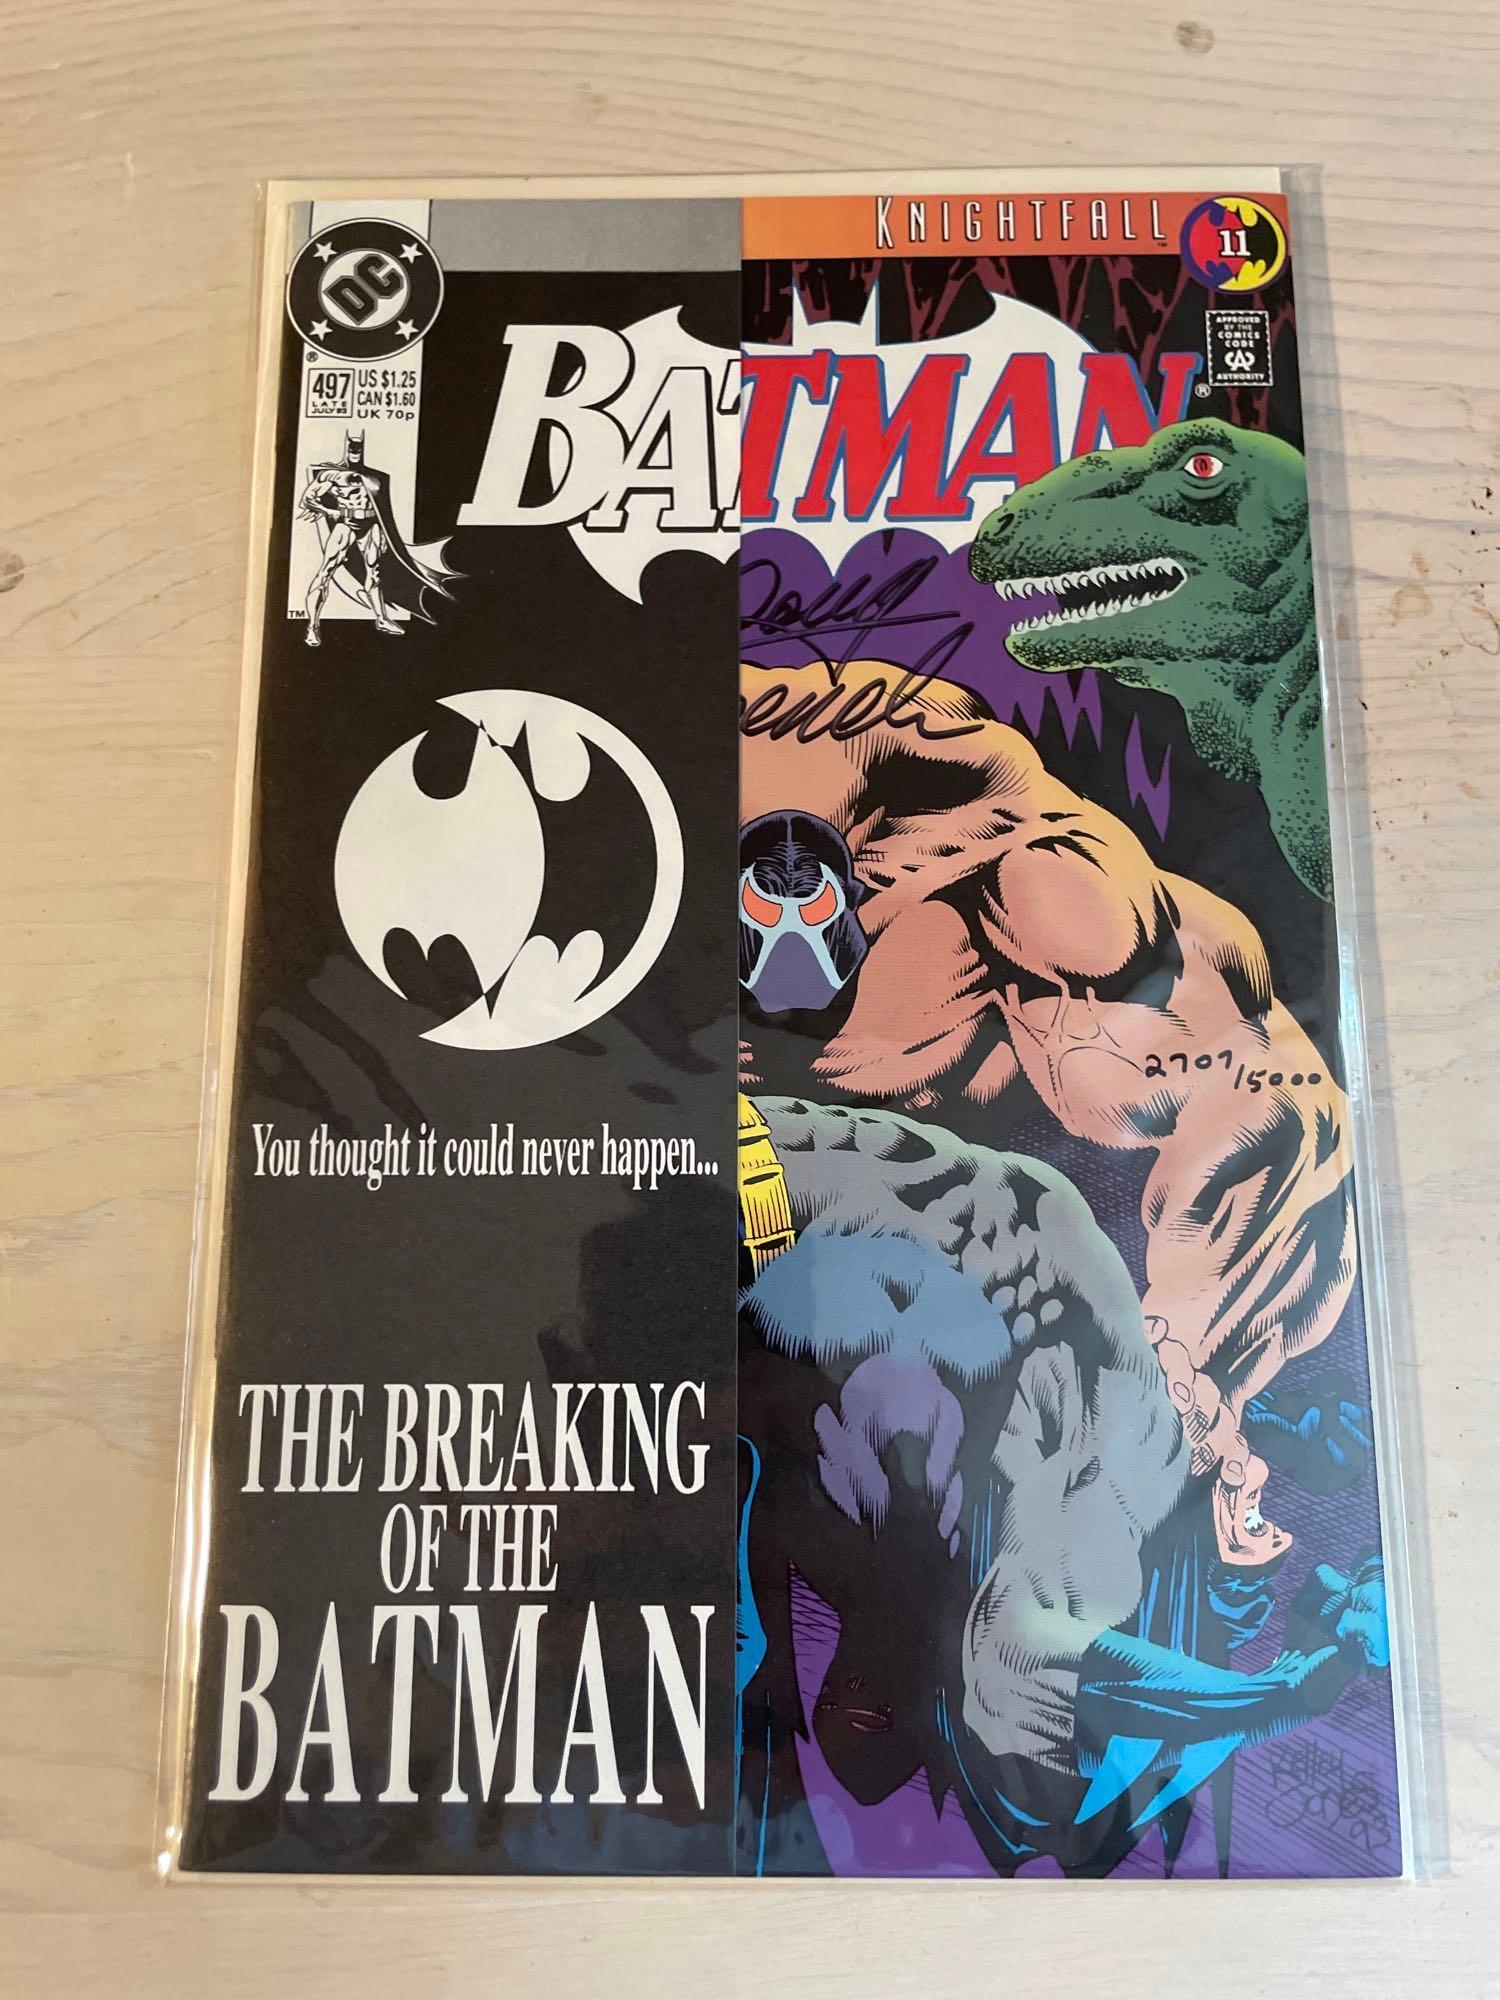 Signed and Numbered Batman and Robin Comics (4)